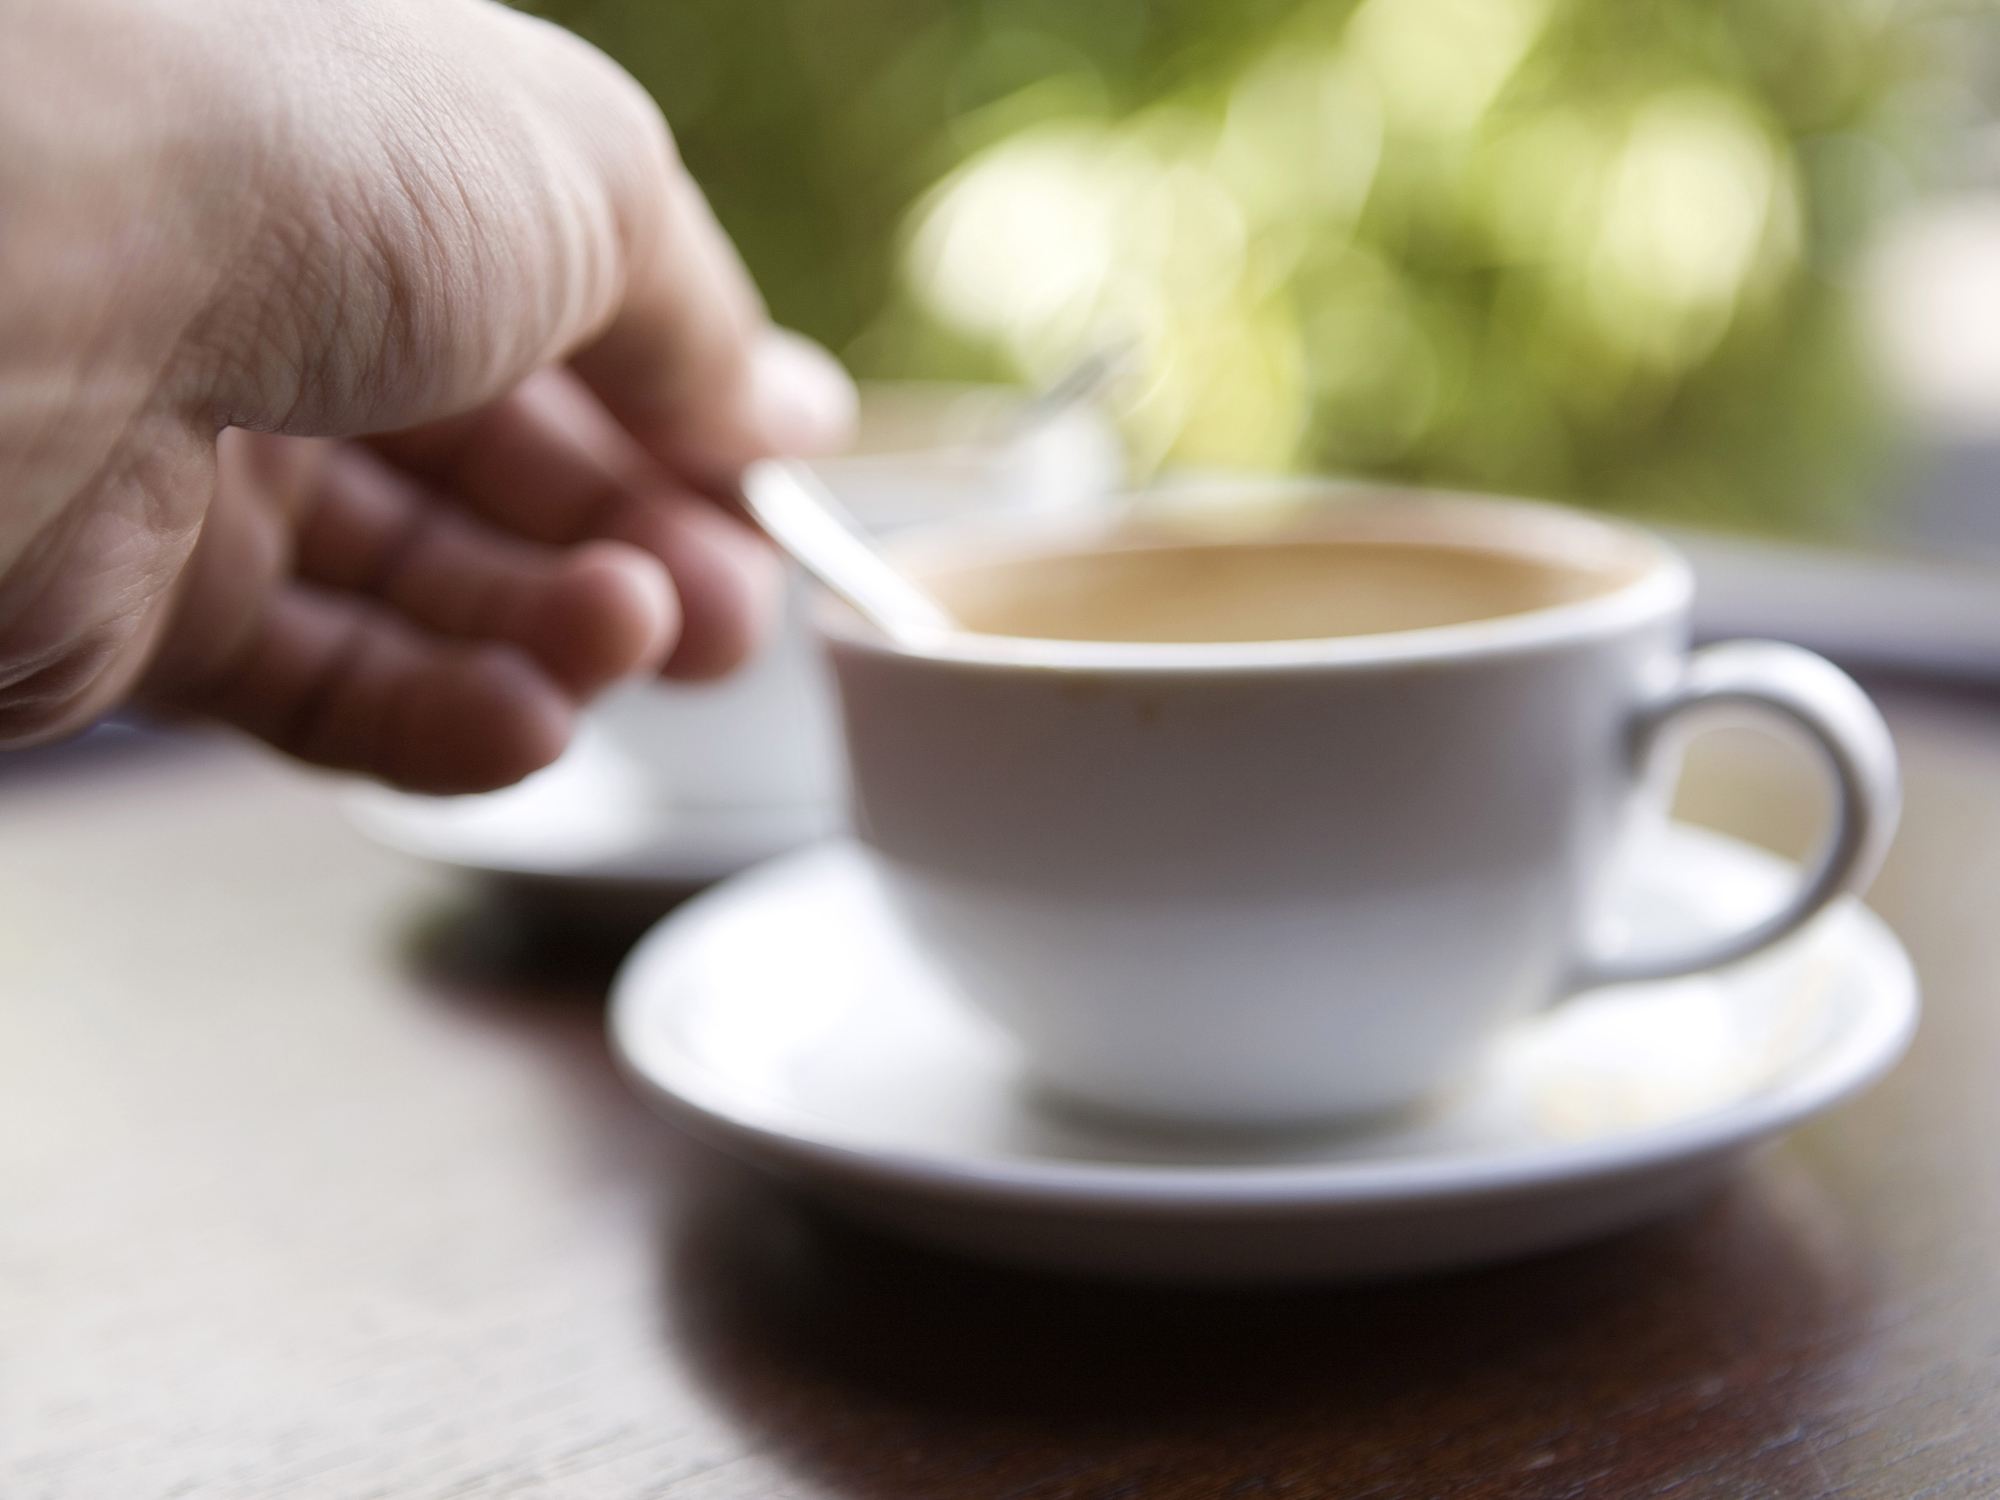 Beware of this not-so-sweet side effect of coffee